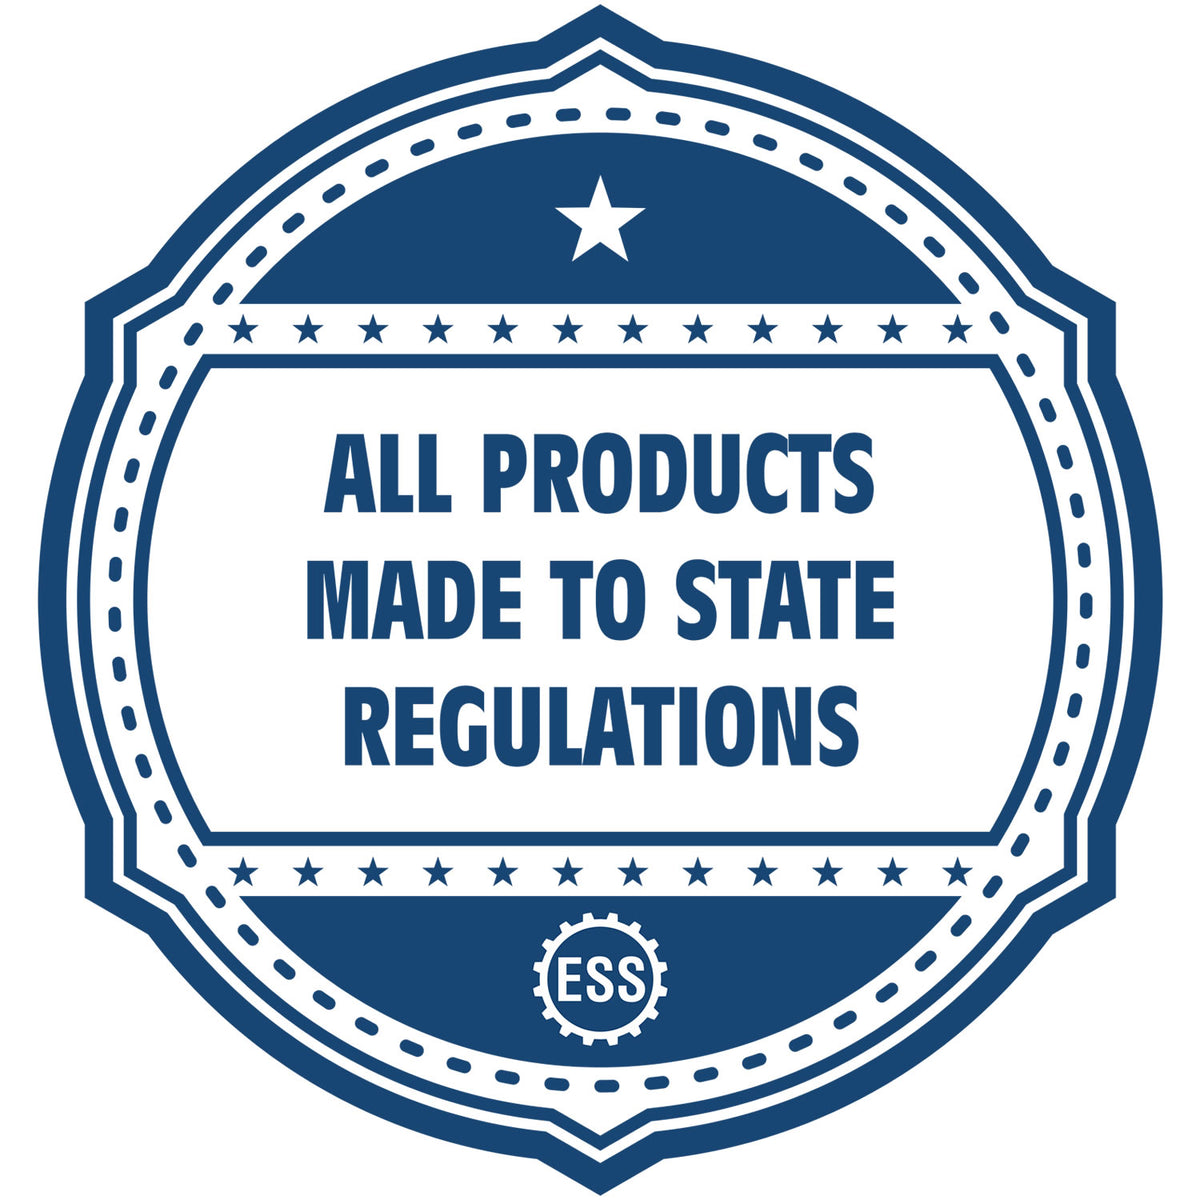 An icon or badge element for the MaxLight Premium Pre-Inked Nebraska State Seal Notarial Stamp showing that this product is made in compliance with state regulations.